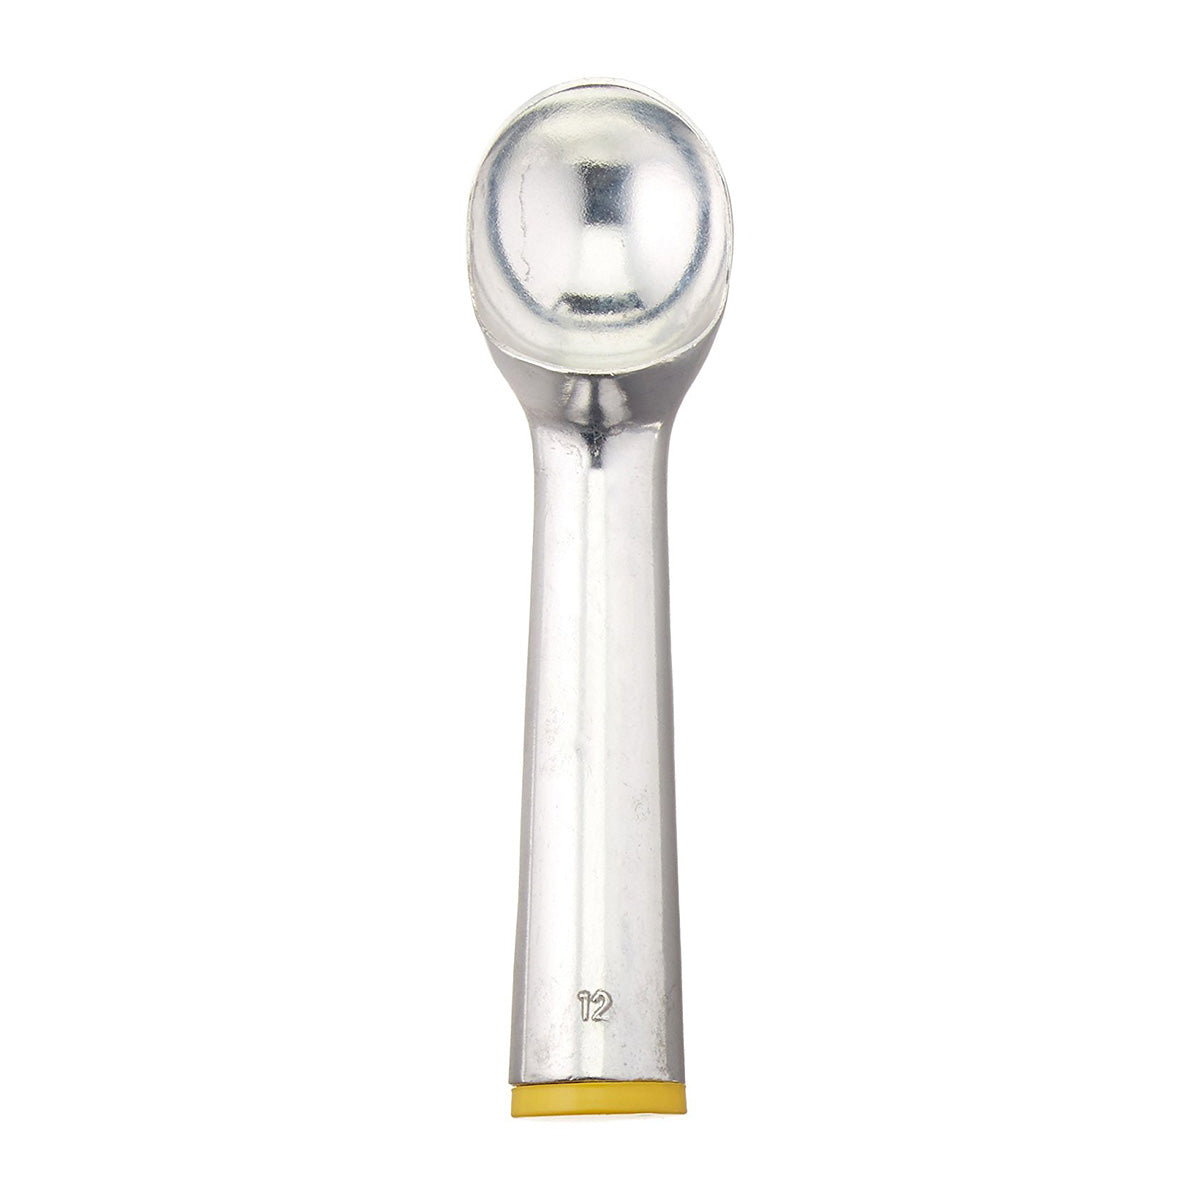 Special Offer - Vollrath #12 Green Disher Portion Scoop, 2 2/3 oz